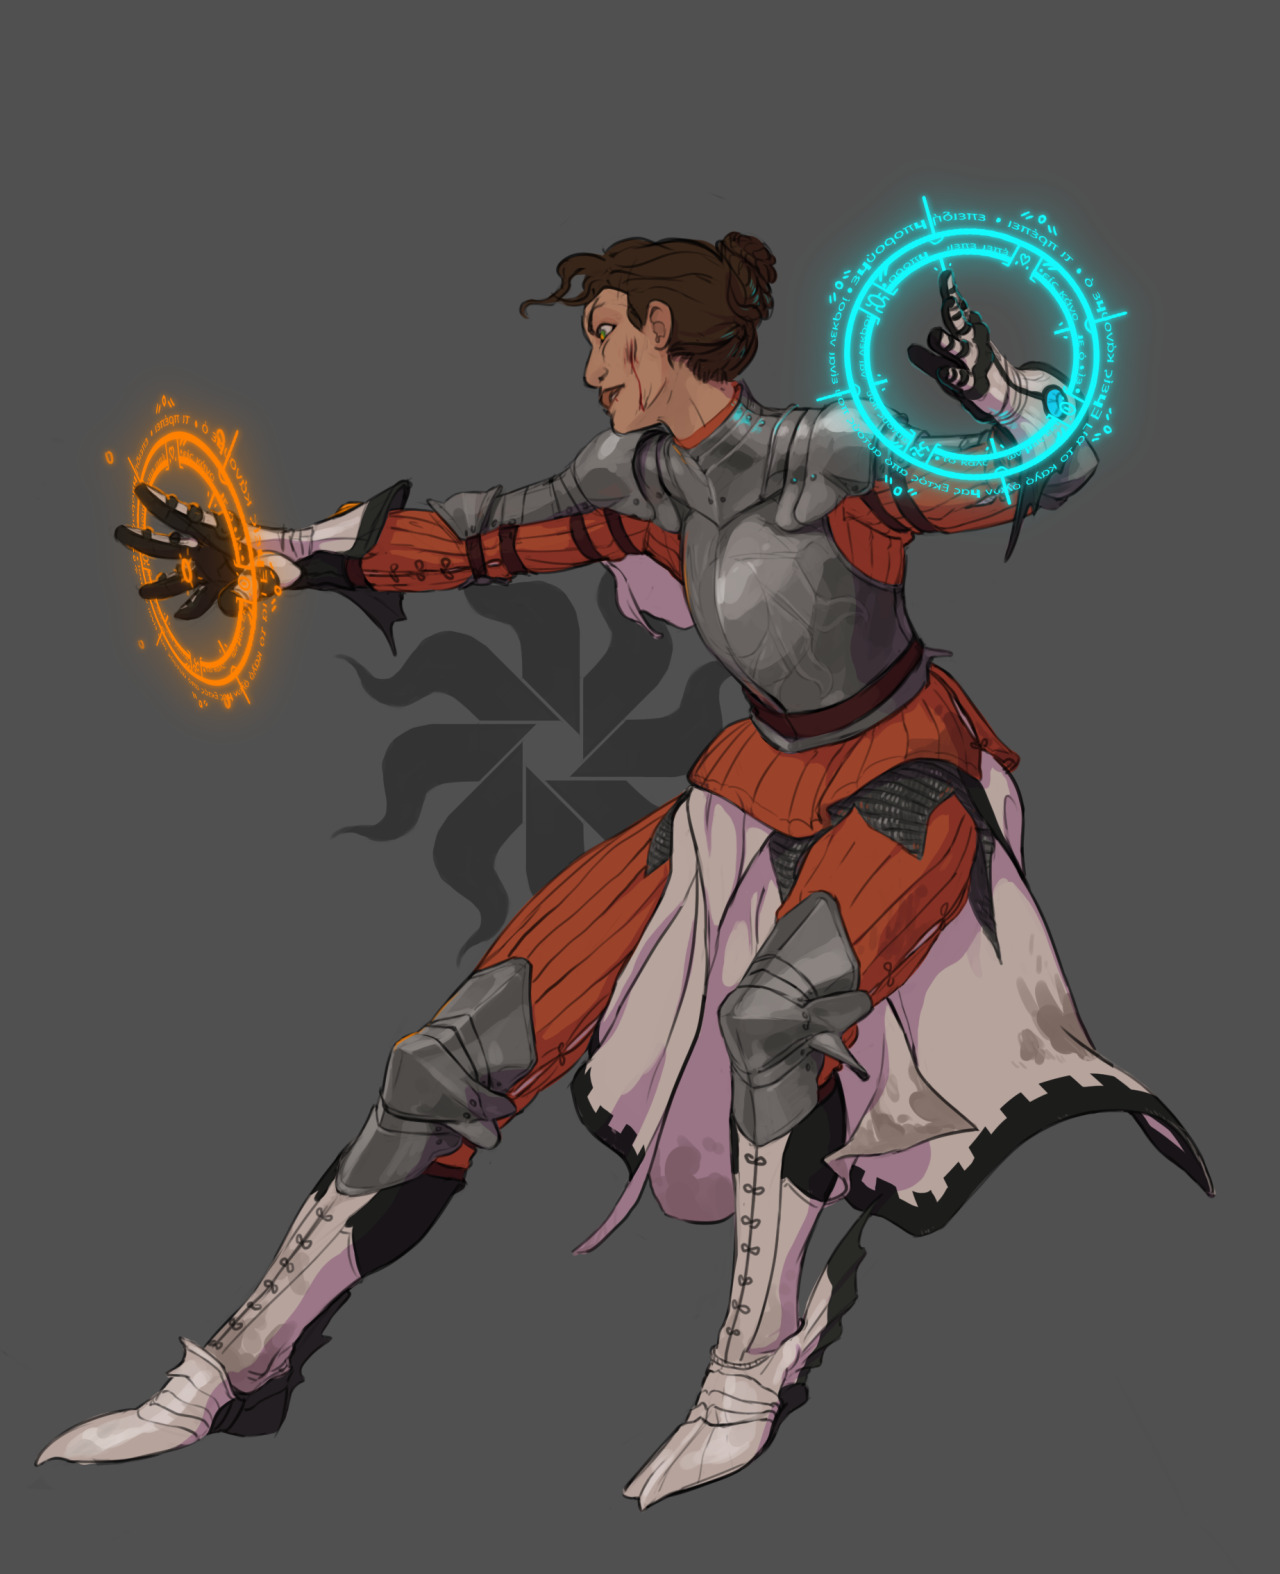 pythosart: Knight-mage Chell, portaling her way through an ancient dungeon full of